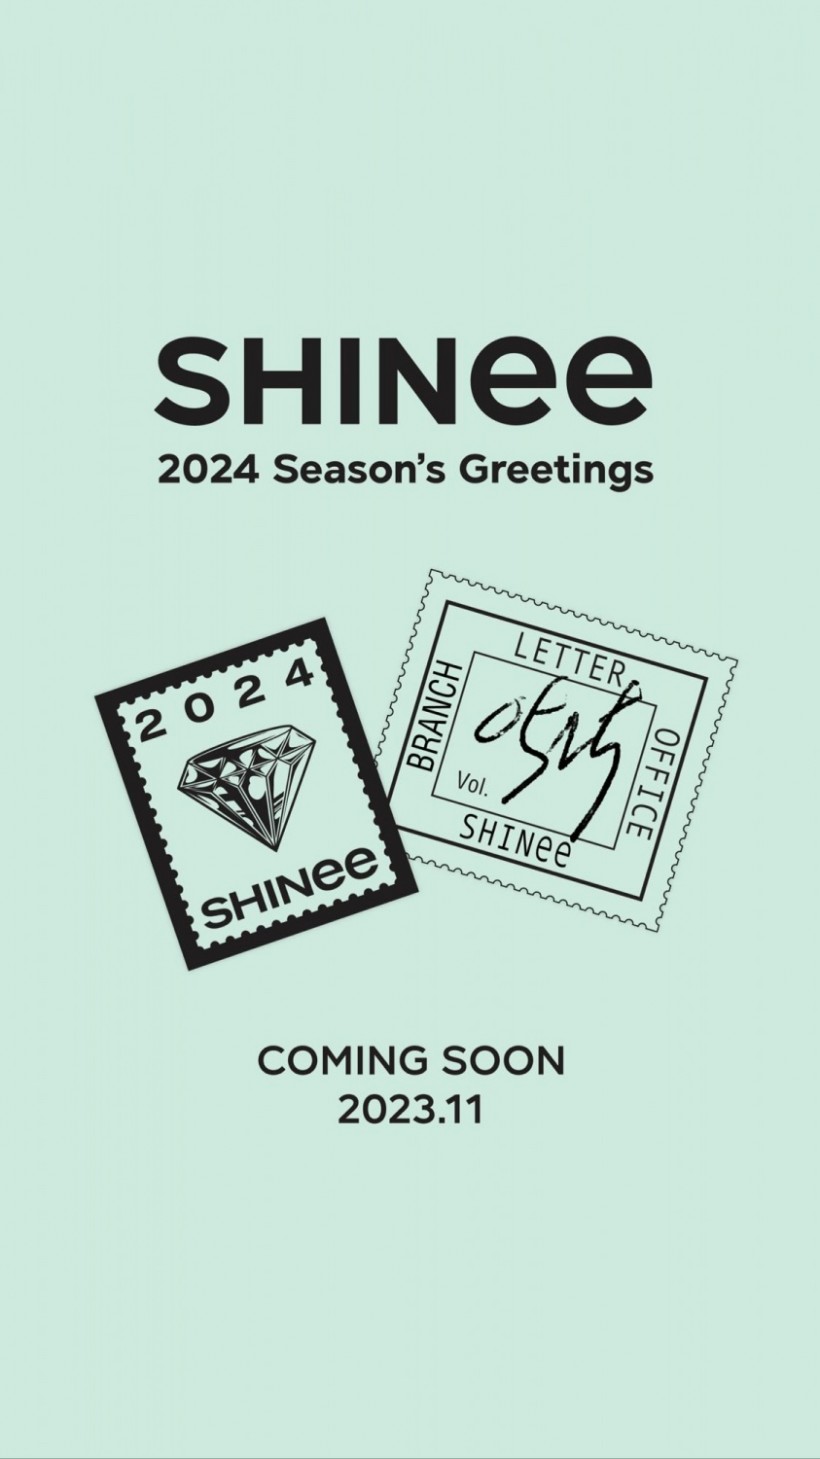 SNSD, SHINee, EXO Excluded From SM's Season's Greetings 2024 Announcement — What Happened?